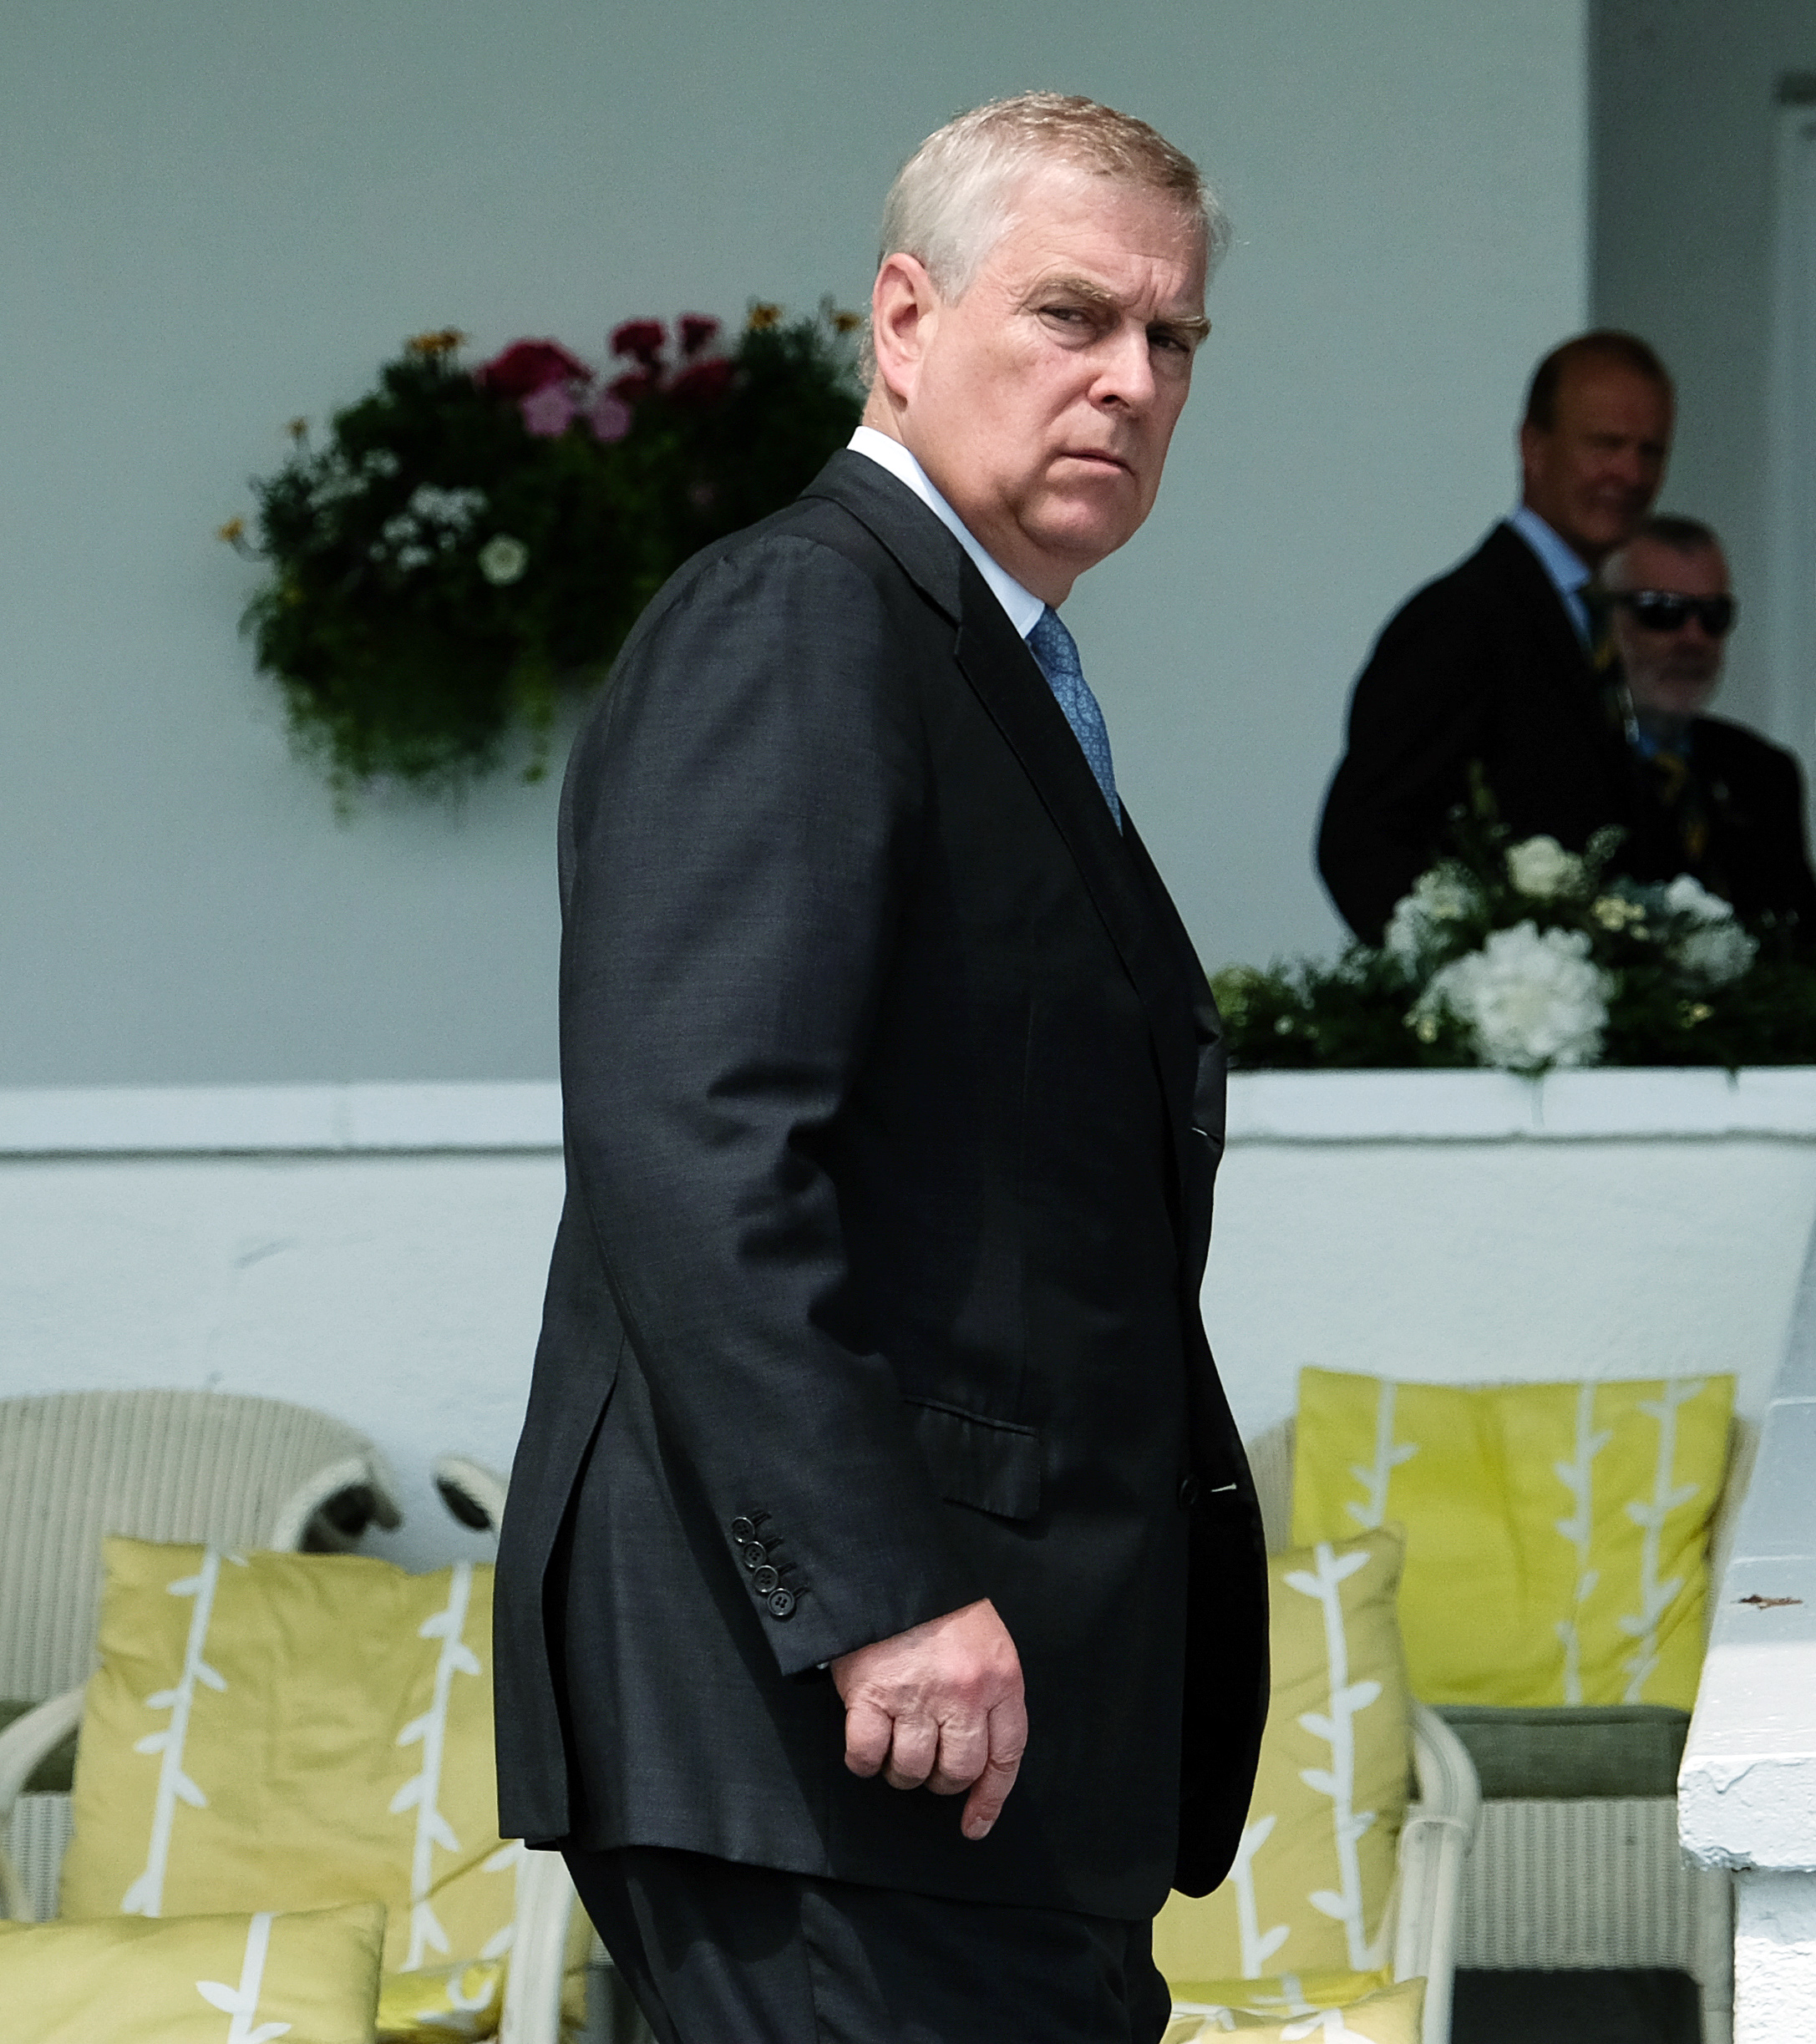 PHOTO: Prince Andrew, Duke of York attends an agricultural event on July 11, 2019, in Harrogate, England.